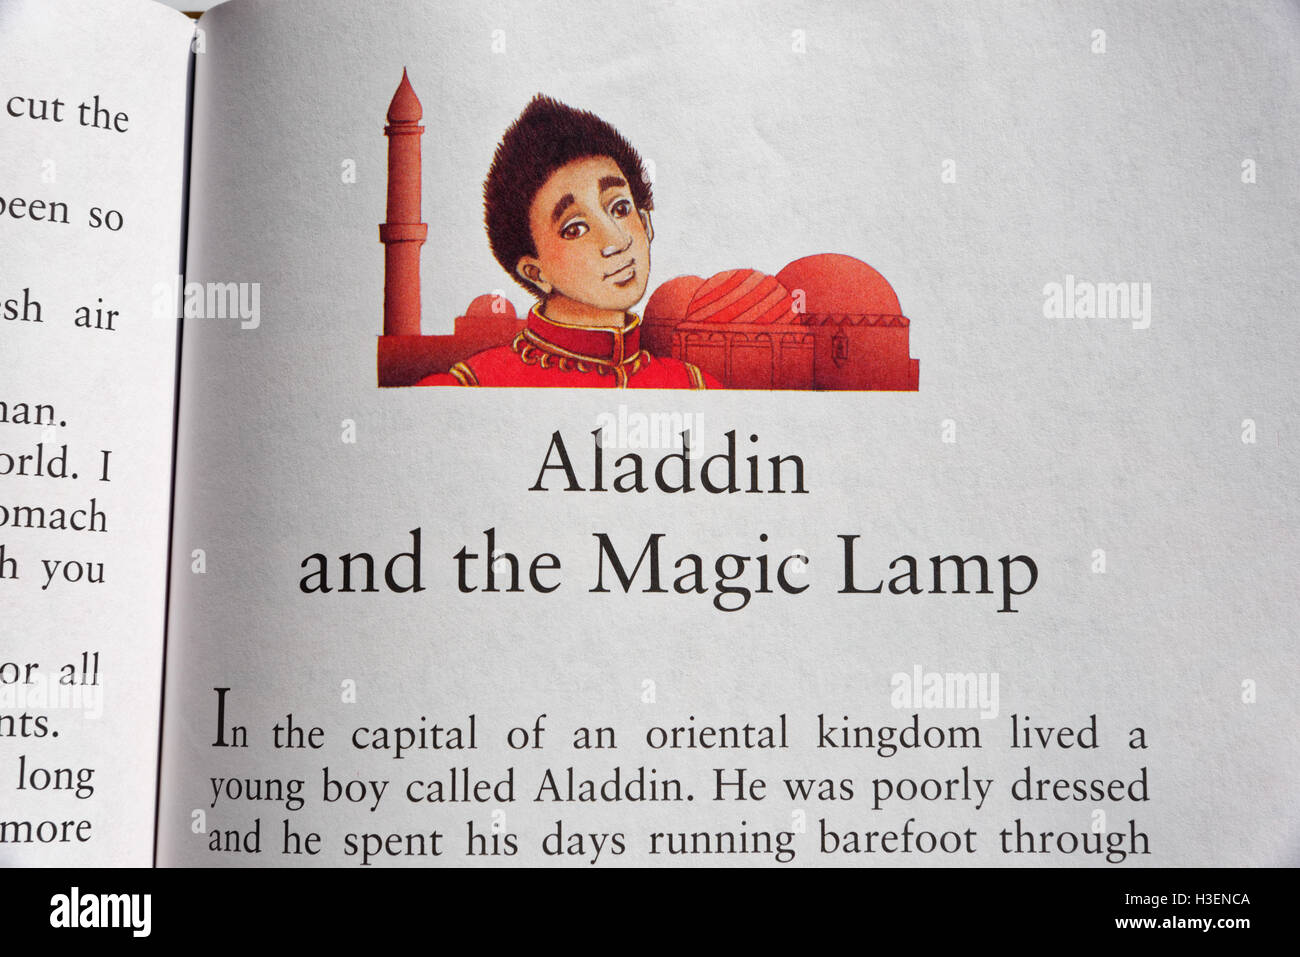 Aladdin and the Magic Lamp in a book of Fairy Tales Stock Photo